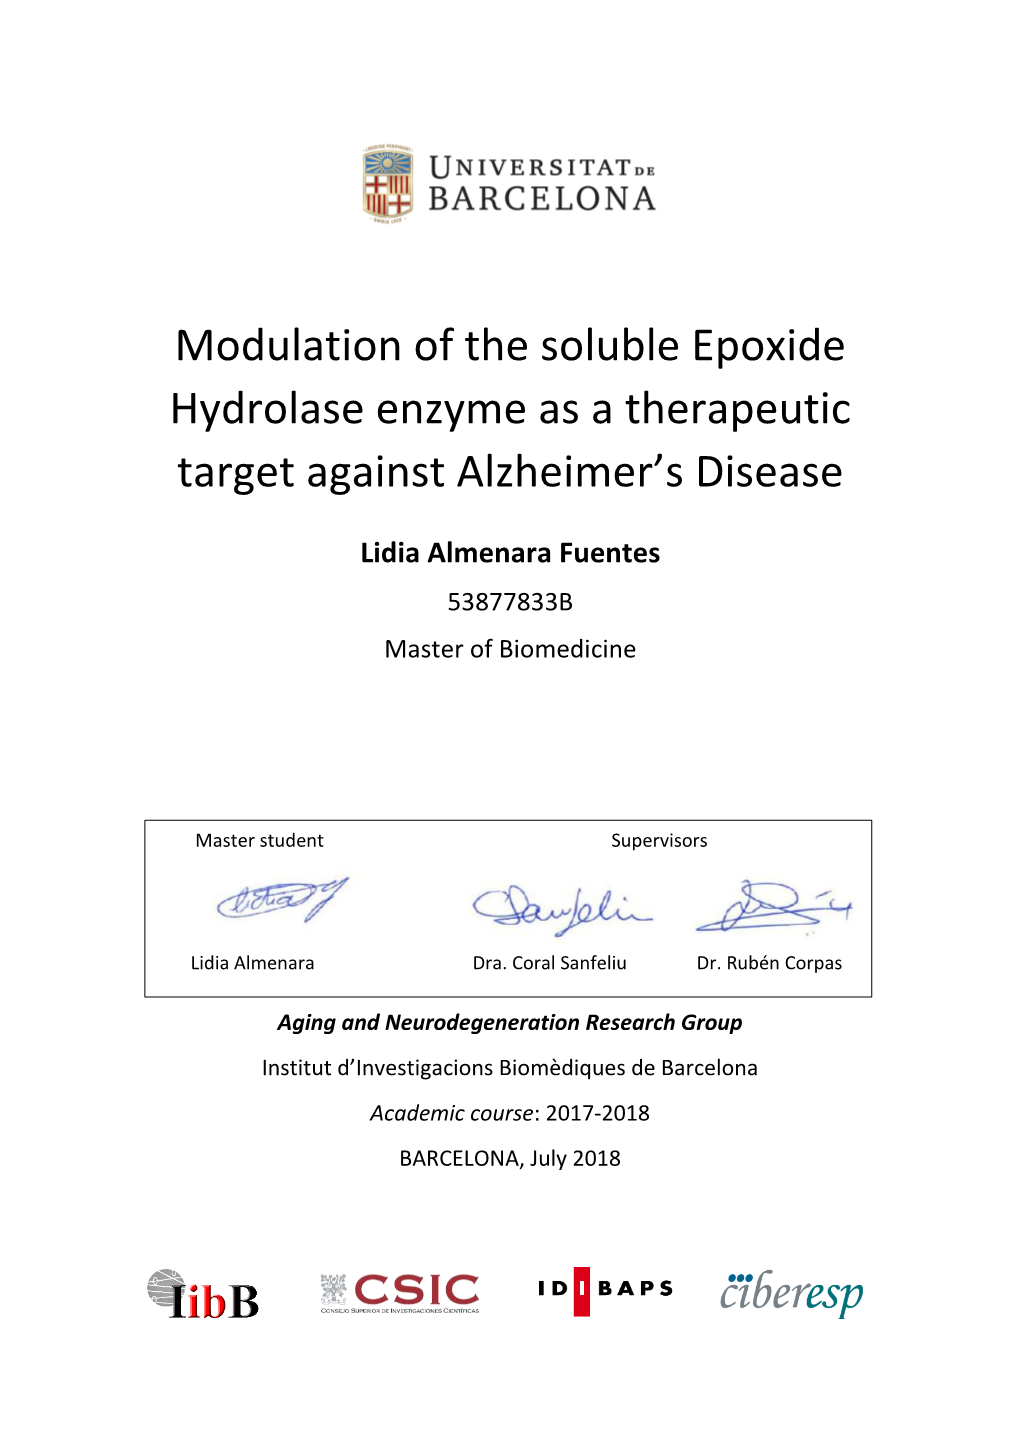 Modulation of the Soluble Epoxide Hydrolase Enzyme As a Therapeutic Target Against Alzheimer’S Disease